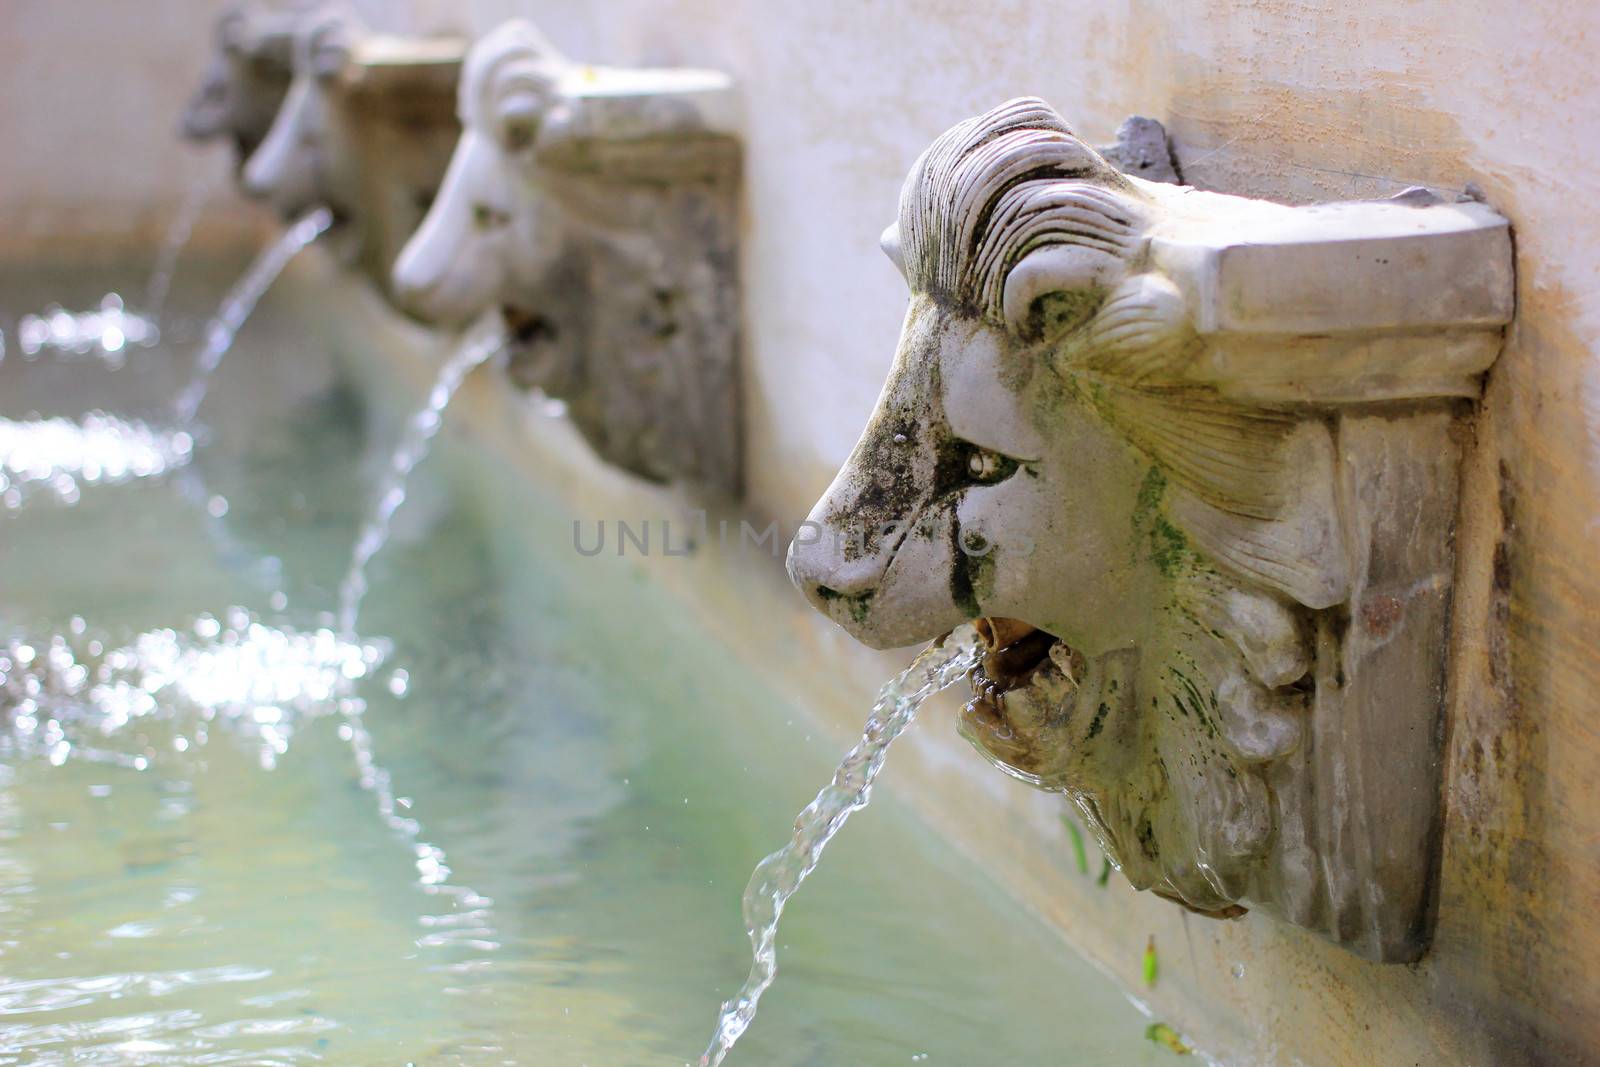 Water flow from lion statue on wall  by nuchylee